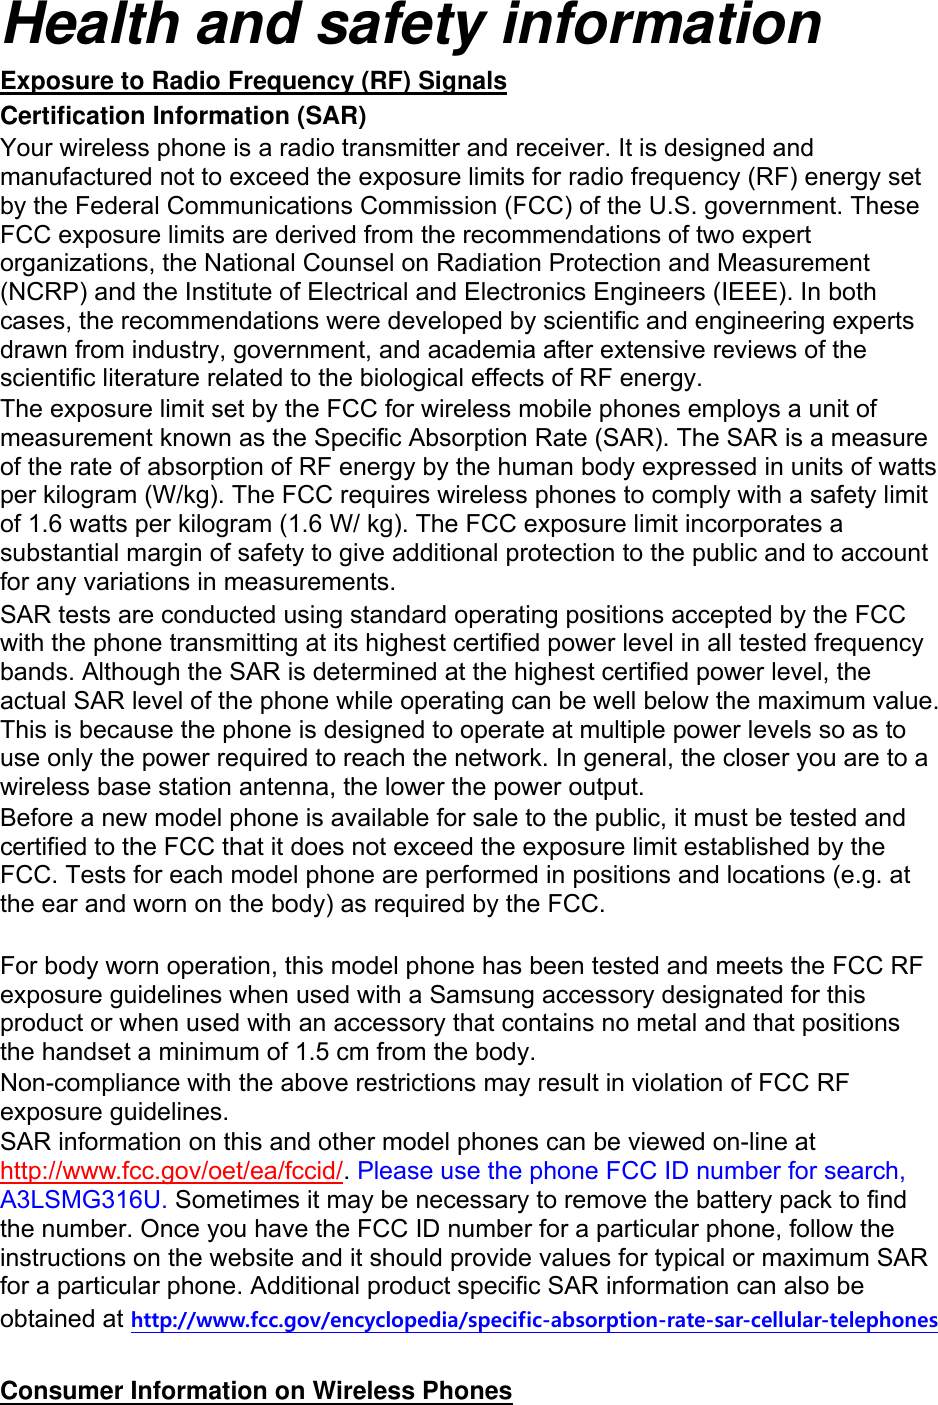 Health and safety information Exposure to Radio Frequency (RF) Signals Certification Information (SAR) Your wireless phone is a radio transmitter and receiver. It is designed and manufactured not to exceed the exposure limits for radio frequency (RF) energy set by the Federal Communications Commission (FCC) of the U.S. government. These FCC exposure limits are derived from the recommendations of two expert organizations, the National Counsel on Radiation Protection and Measurement (NCRP) and the Institute of Electrical and Electronics Engineers (IEEE). In both cases, the recommendations were developed by scientific and engineering experts drawn from industry, government, and academia after extensive reviews of the scientific literature related to the biological effects of RF energy. The exposure limit set by the FCC for wireless mobile phones employs a unit of measurement known as the Specific Absorption Rate (SAR). The SAR is a measure of the rate of absorption of RF energy by the human body expressed in units of watts per kilogram (W/kg). The FCC requires wireless phones to comply with a safety limit of 1.6 watts per kilogram (1.6 W/ kg). The FCC exposure limit incorporates a substantial margin of safety to give additional protection to the public and to account for any variations in measurements. SAR tests are conducted using standard operating positions accepted by the FCC with the phone transmitting at its highest certified power level in all tested frequency bands. Although the SAR is determined at the highest certified power level, the actual SAR level of the phone while operating can be well below the maximum value. This is because the phone is designed to operate at multiple power levels so as to use only the power required to reach the network. In general, the closer you are to a wireless base station antenna, the lower the power output. Before a new model phone is available for sale to the public, it must be tested and certified to the FCC that it does not exceed the exposure limit established by the FCC. Tests for each model phone are performed in positions and locations (e.g. at the ear and worn on the body) as required by the FCC.      For body worn operation, this model phone has been tested and meets the FCC RF exposure guidelines when used with a Samsung accessory designated for this product or when used with an accessory that contains no metal and that positions the handset a minimum of 1.5 cm from the body.   Non-compliance with the above restrictions may result in violation of FCC RF exposure guidelines. SAR information on this and other model phones can be viewed on-line at http://www.fcc.gov/oet/ea/fccid/. Please use the phone FCC ID number for search, A3LSMG316U. Sometimes it may be necessary to remove the battery pack to find the number. Once you have the FCC ID number for a particular phone, follow the instructions on the website and it should provide values for typical or maximum SAR for a particular phone. Additional product specific SAR information can also be obtained at http://www.fcc.gov/encyclopedia/specific-absorption-rate-sar-cellular-telephones  Consumer Information on Wireless Phones 